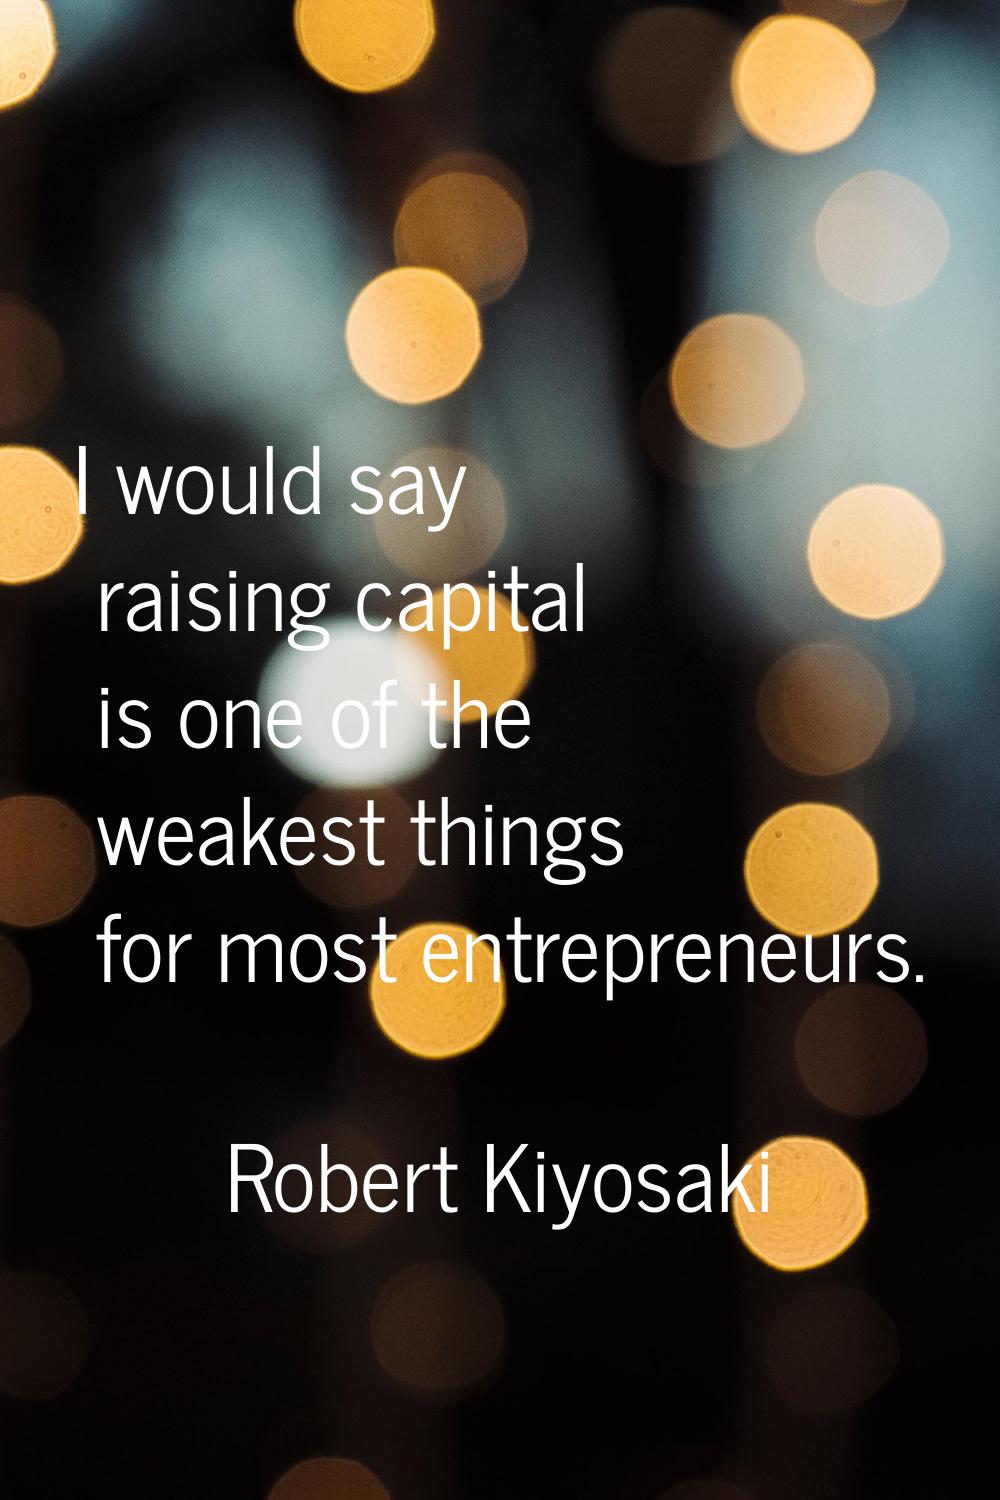 I would say raising capital is one of the weakest things for most entrepreneurs.